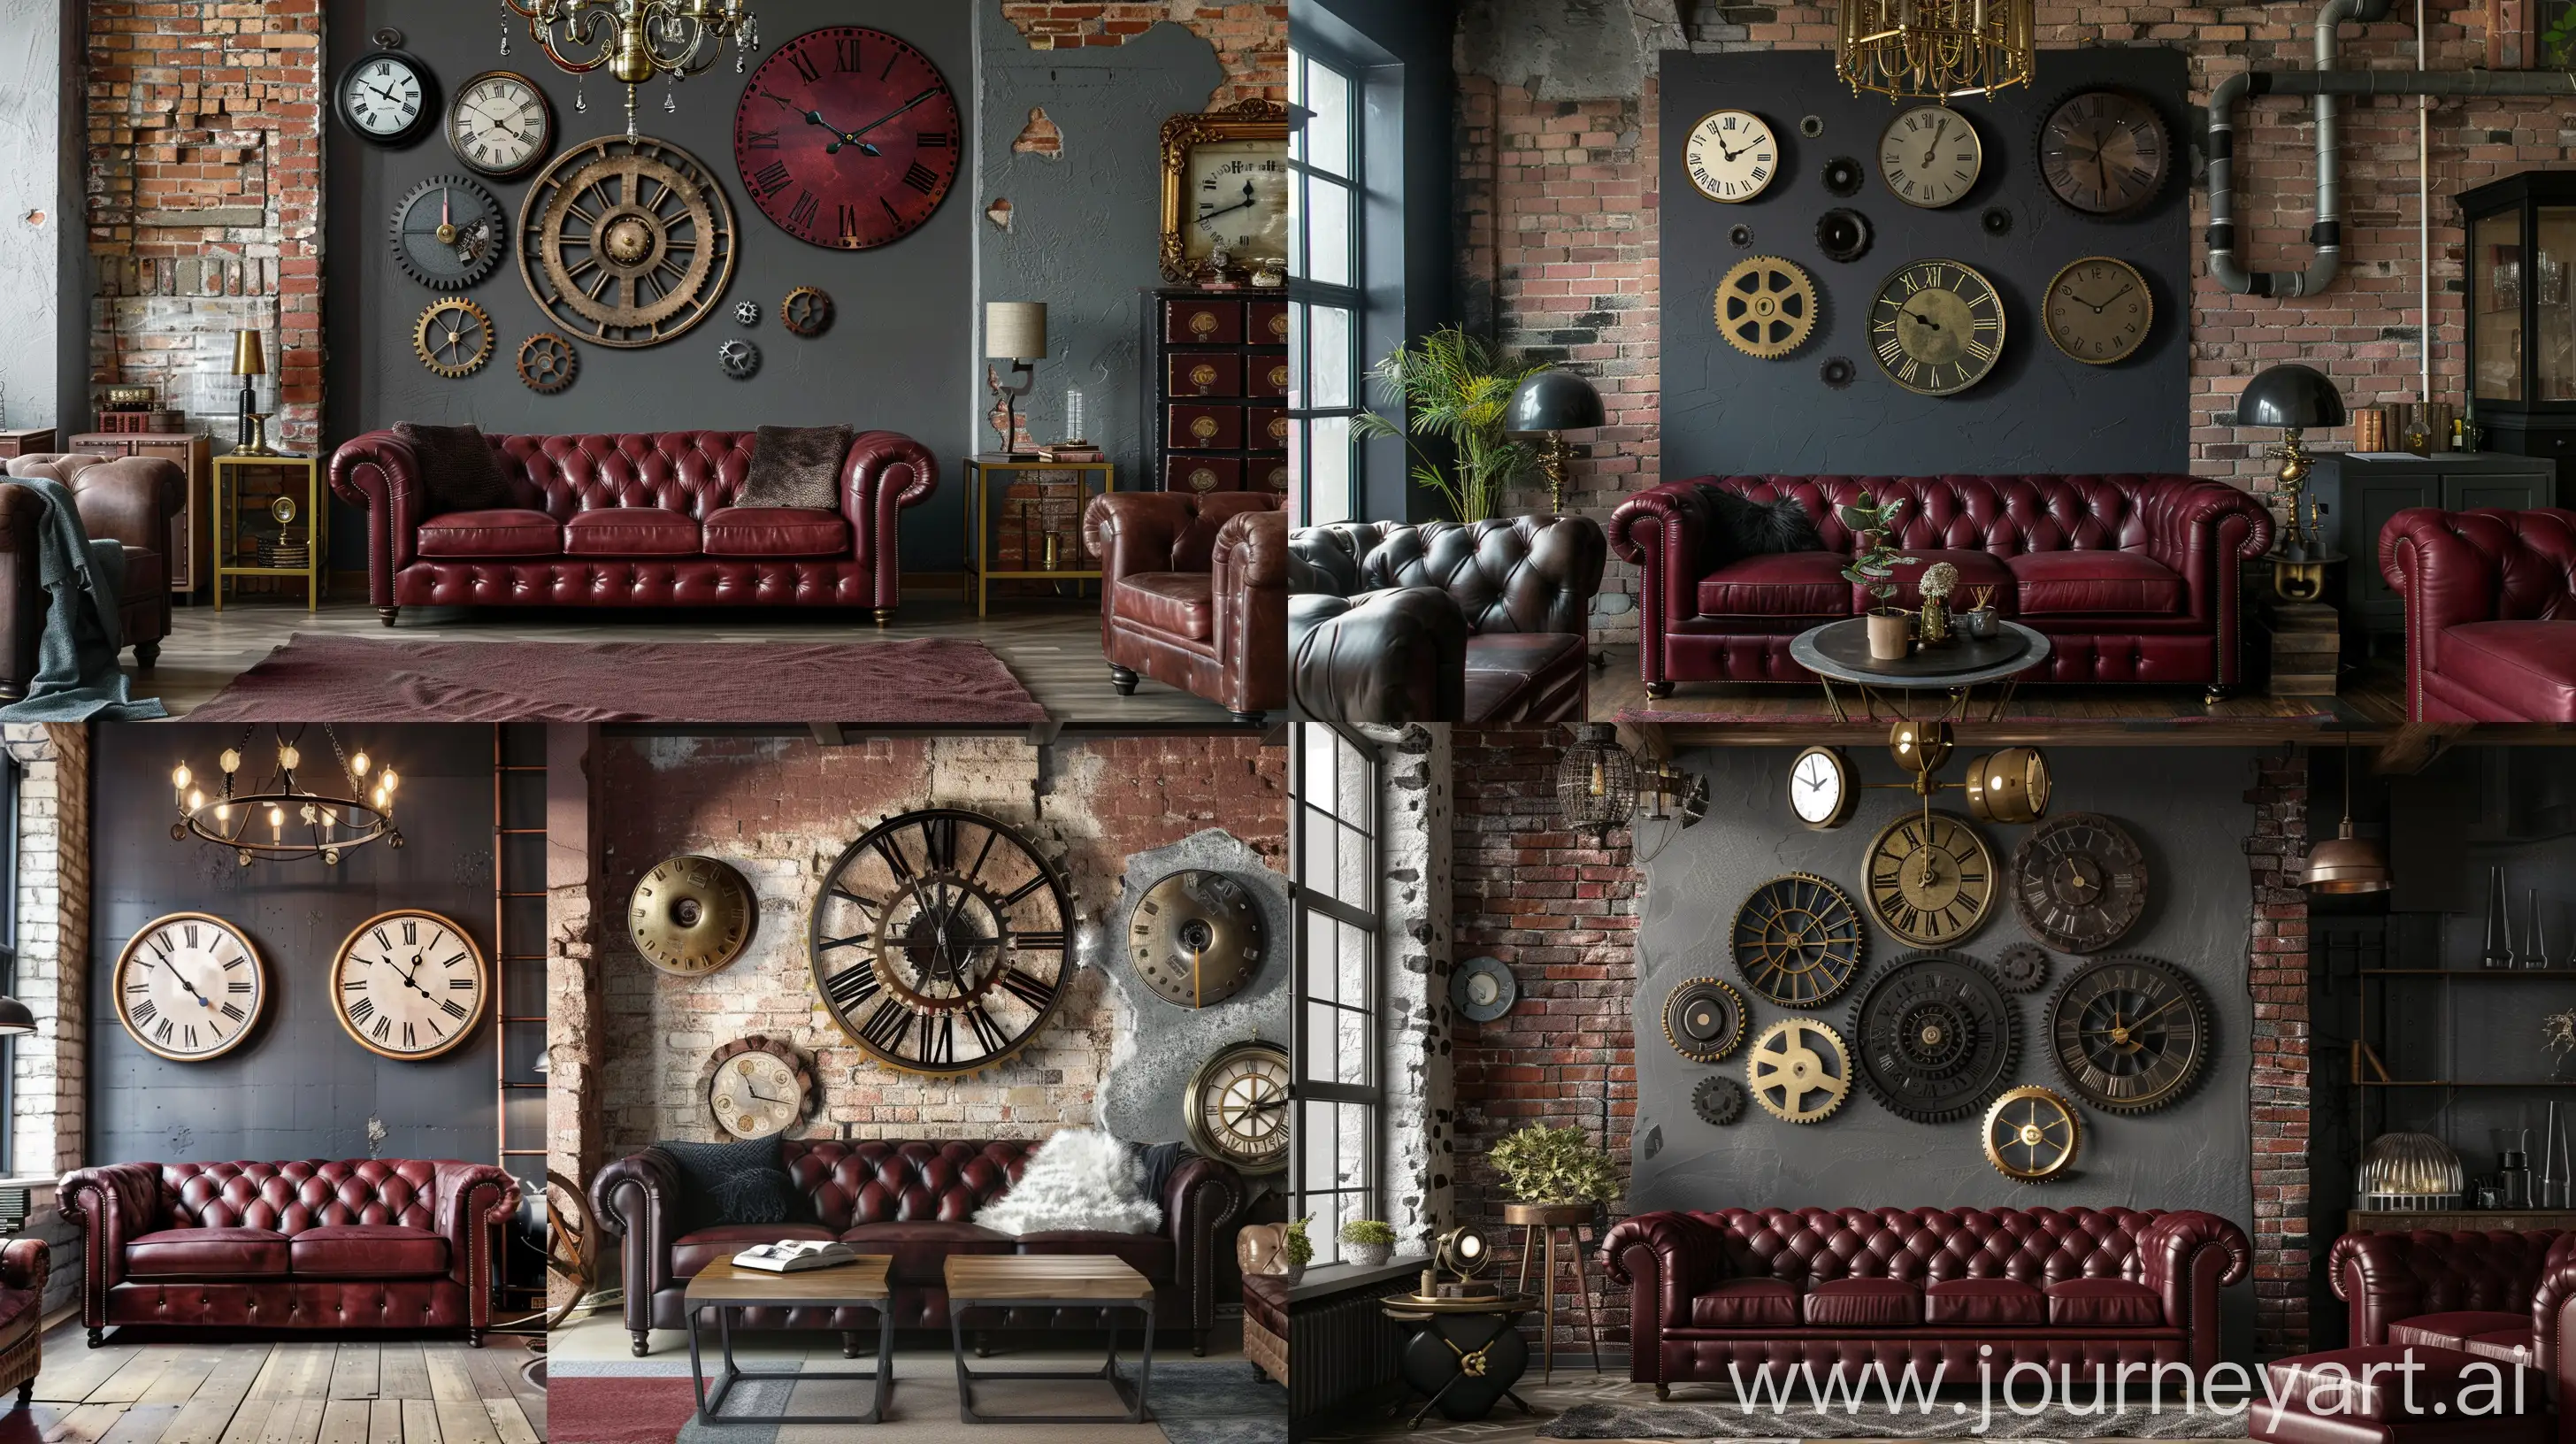 Industrial Chic Living Room. Think exposed brick walls adorned with vintage clocks, leather Chesterfield sofas, and a centerpiece chandelier made from repurposed gears, Deep burgundy, polished brass, and charcoal gray. These colors meld together to create a warm, inviting atmosphere with a touch of mystery. --ar 16:9